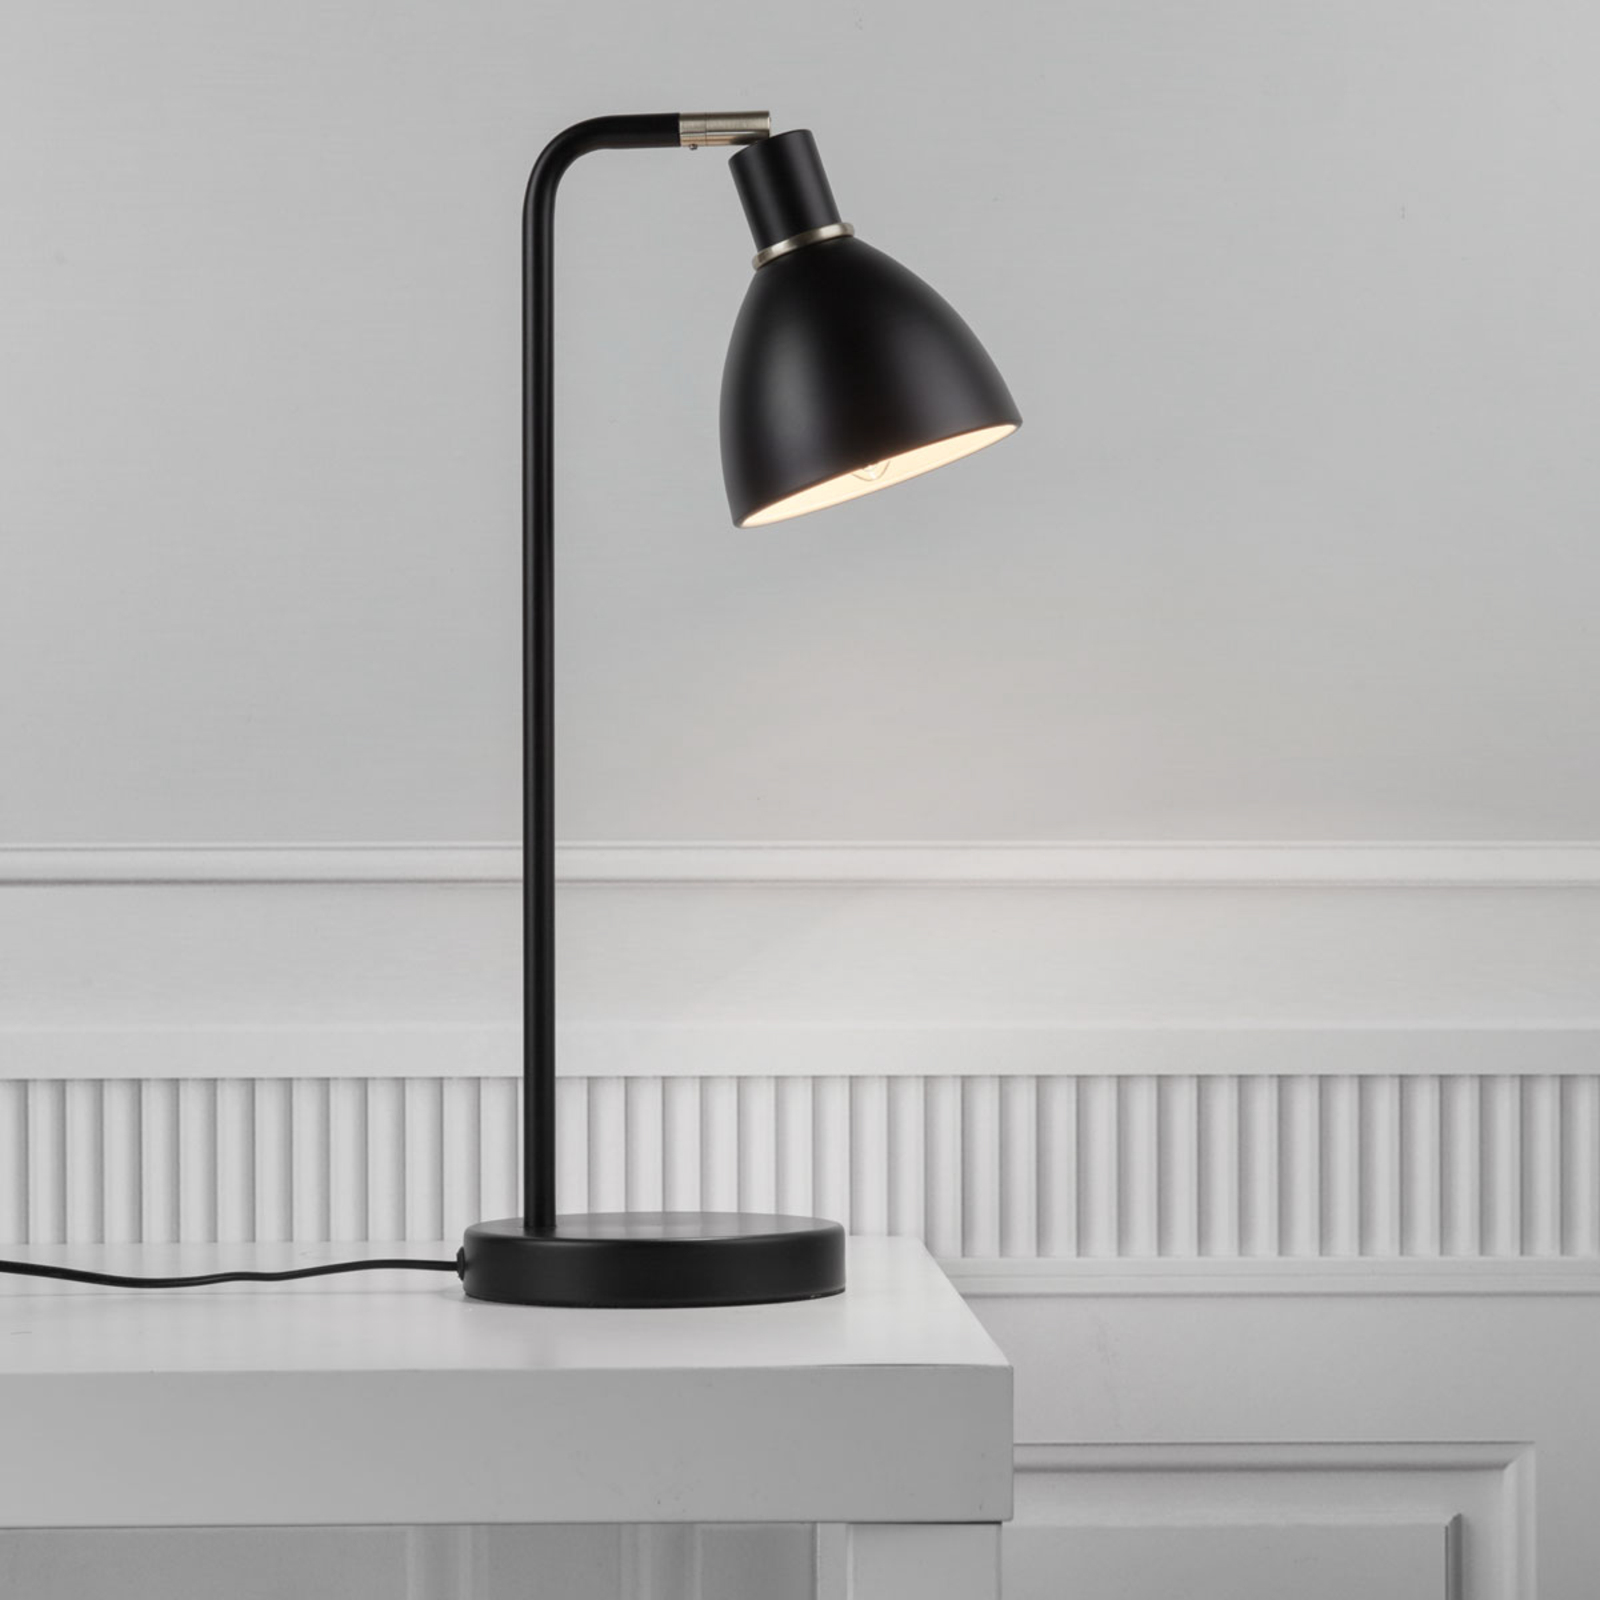 Timeless table lamp Ray for the desk